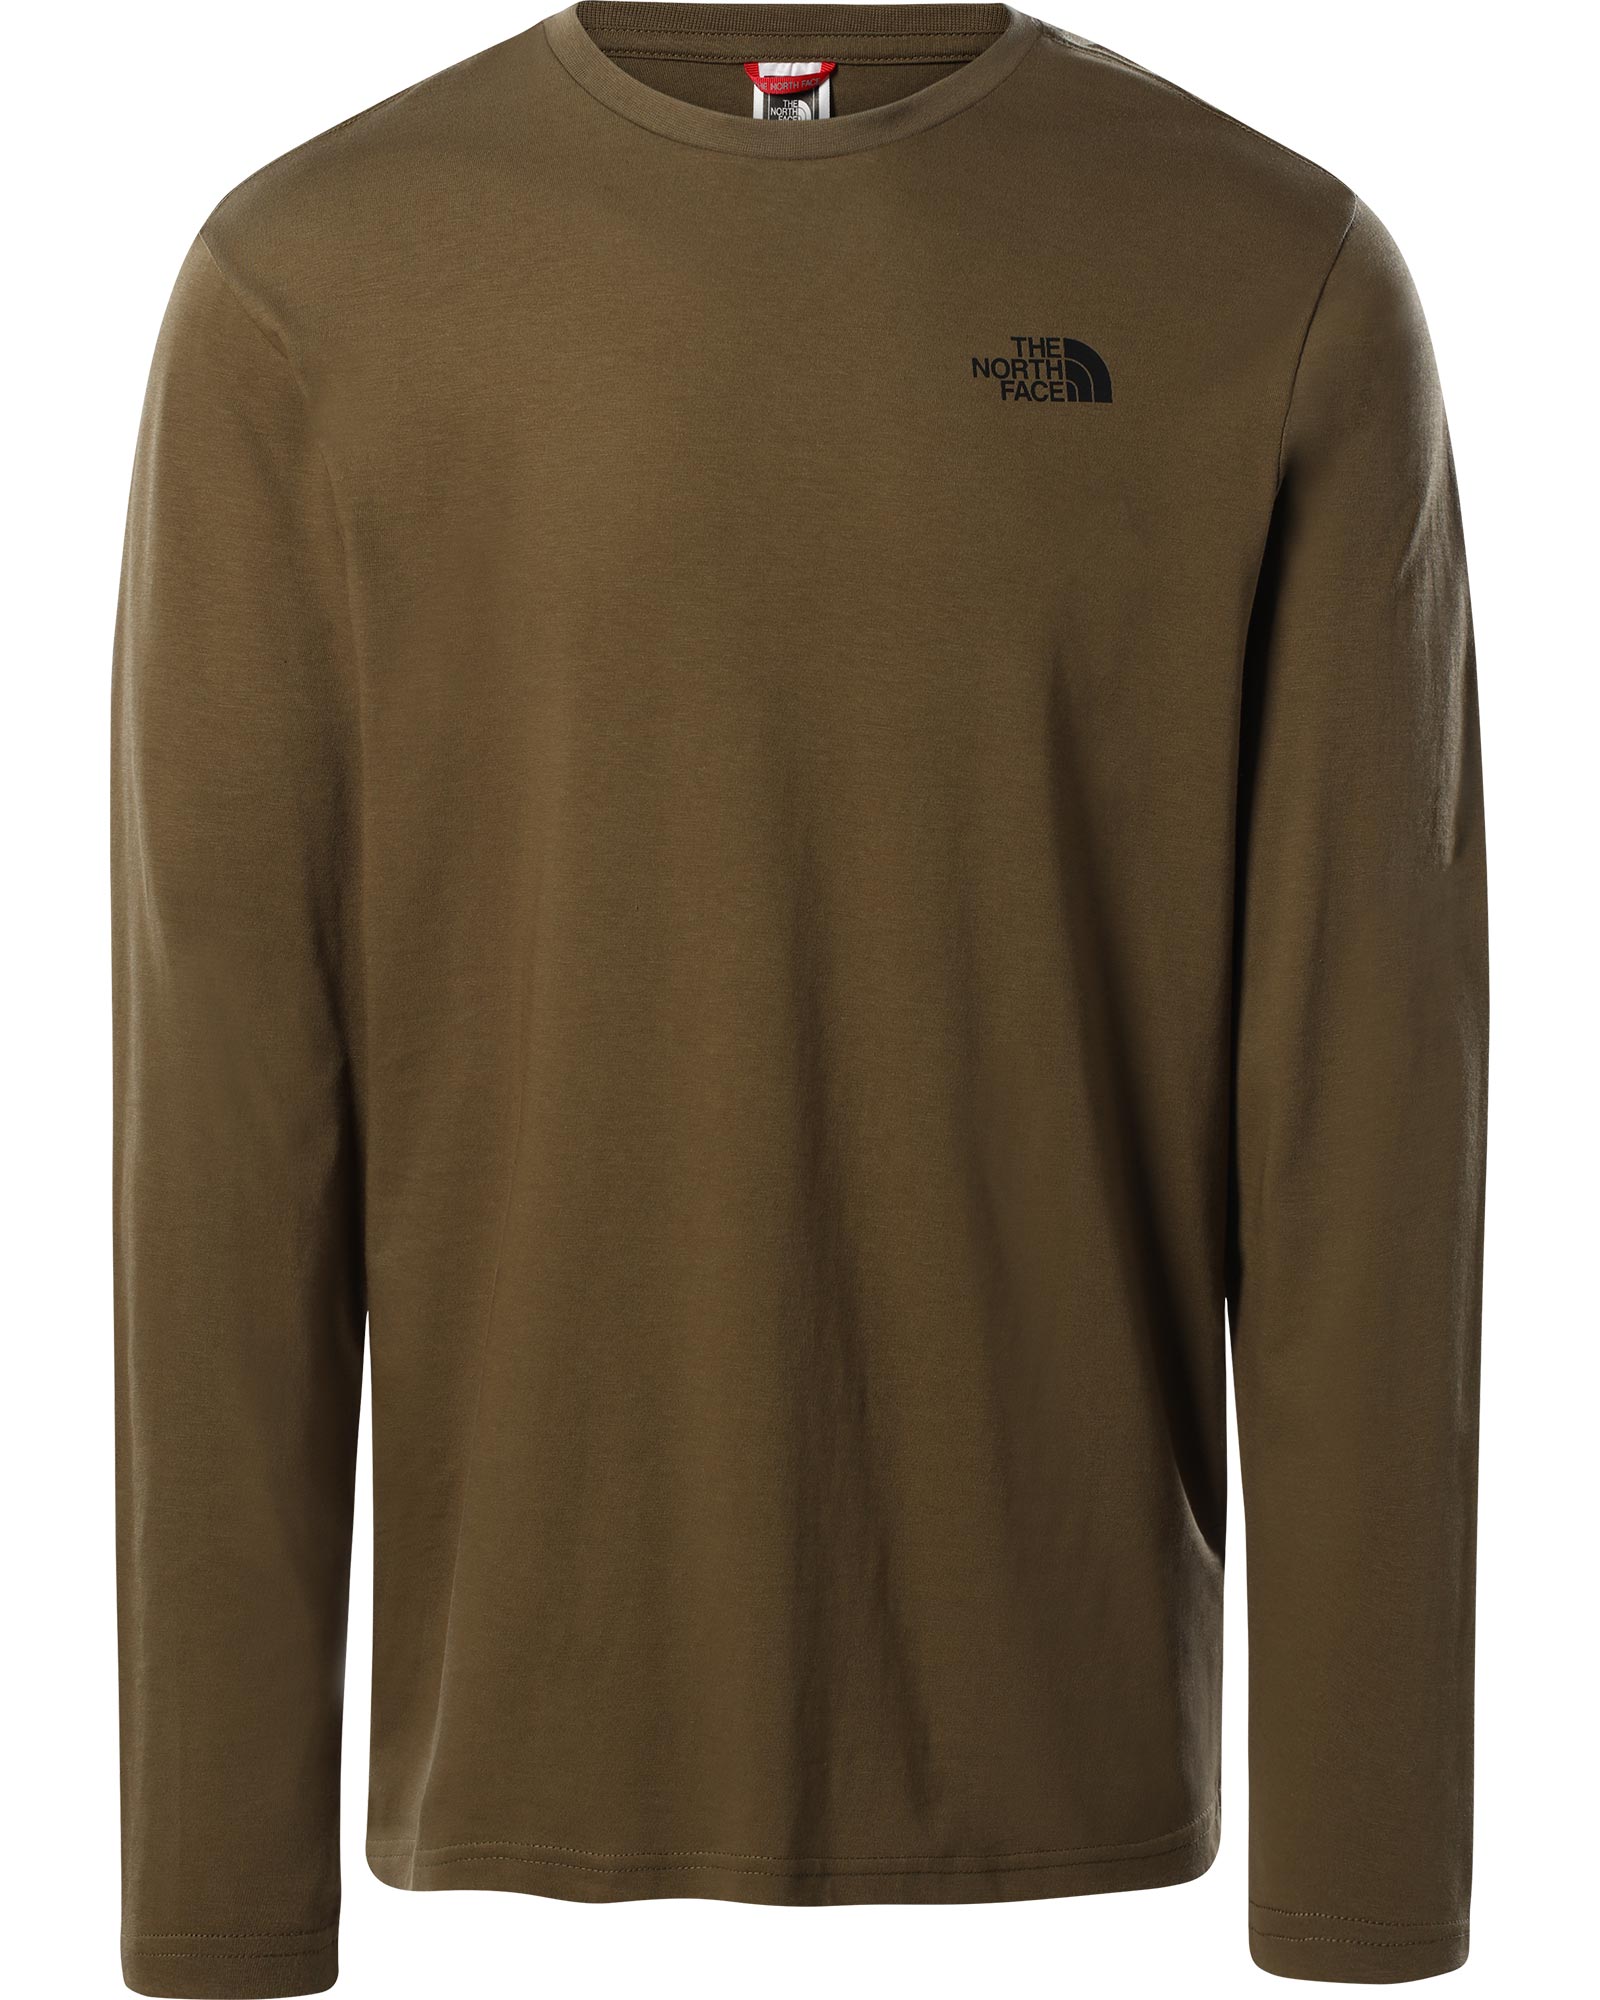 The North Face Easy Men’s Long Sleeve T Shirt - Military Olive XS